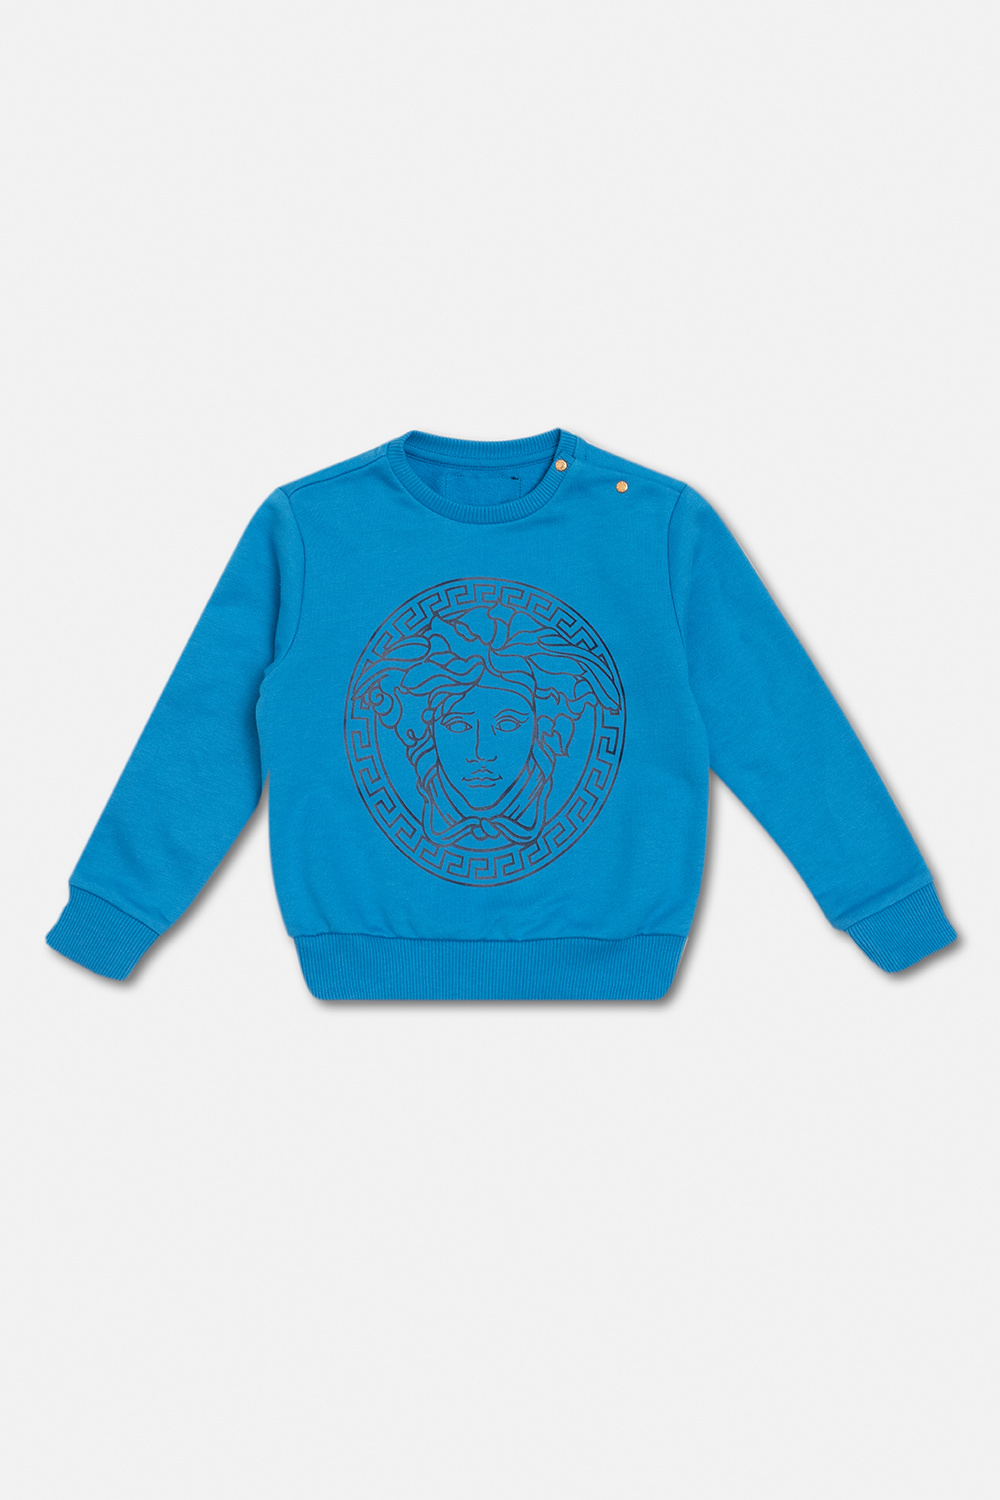 Versace Kids Givenchy Shirts for Women